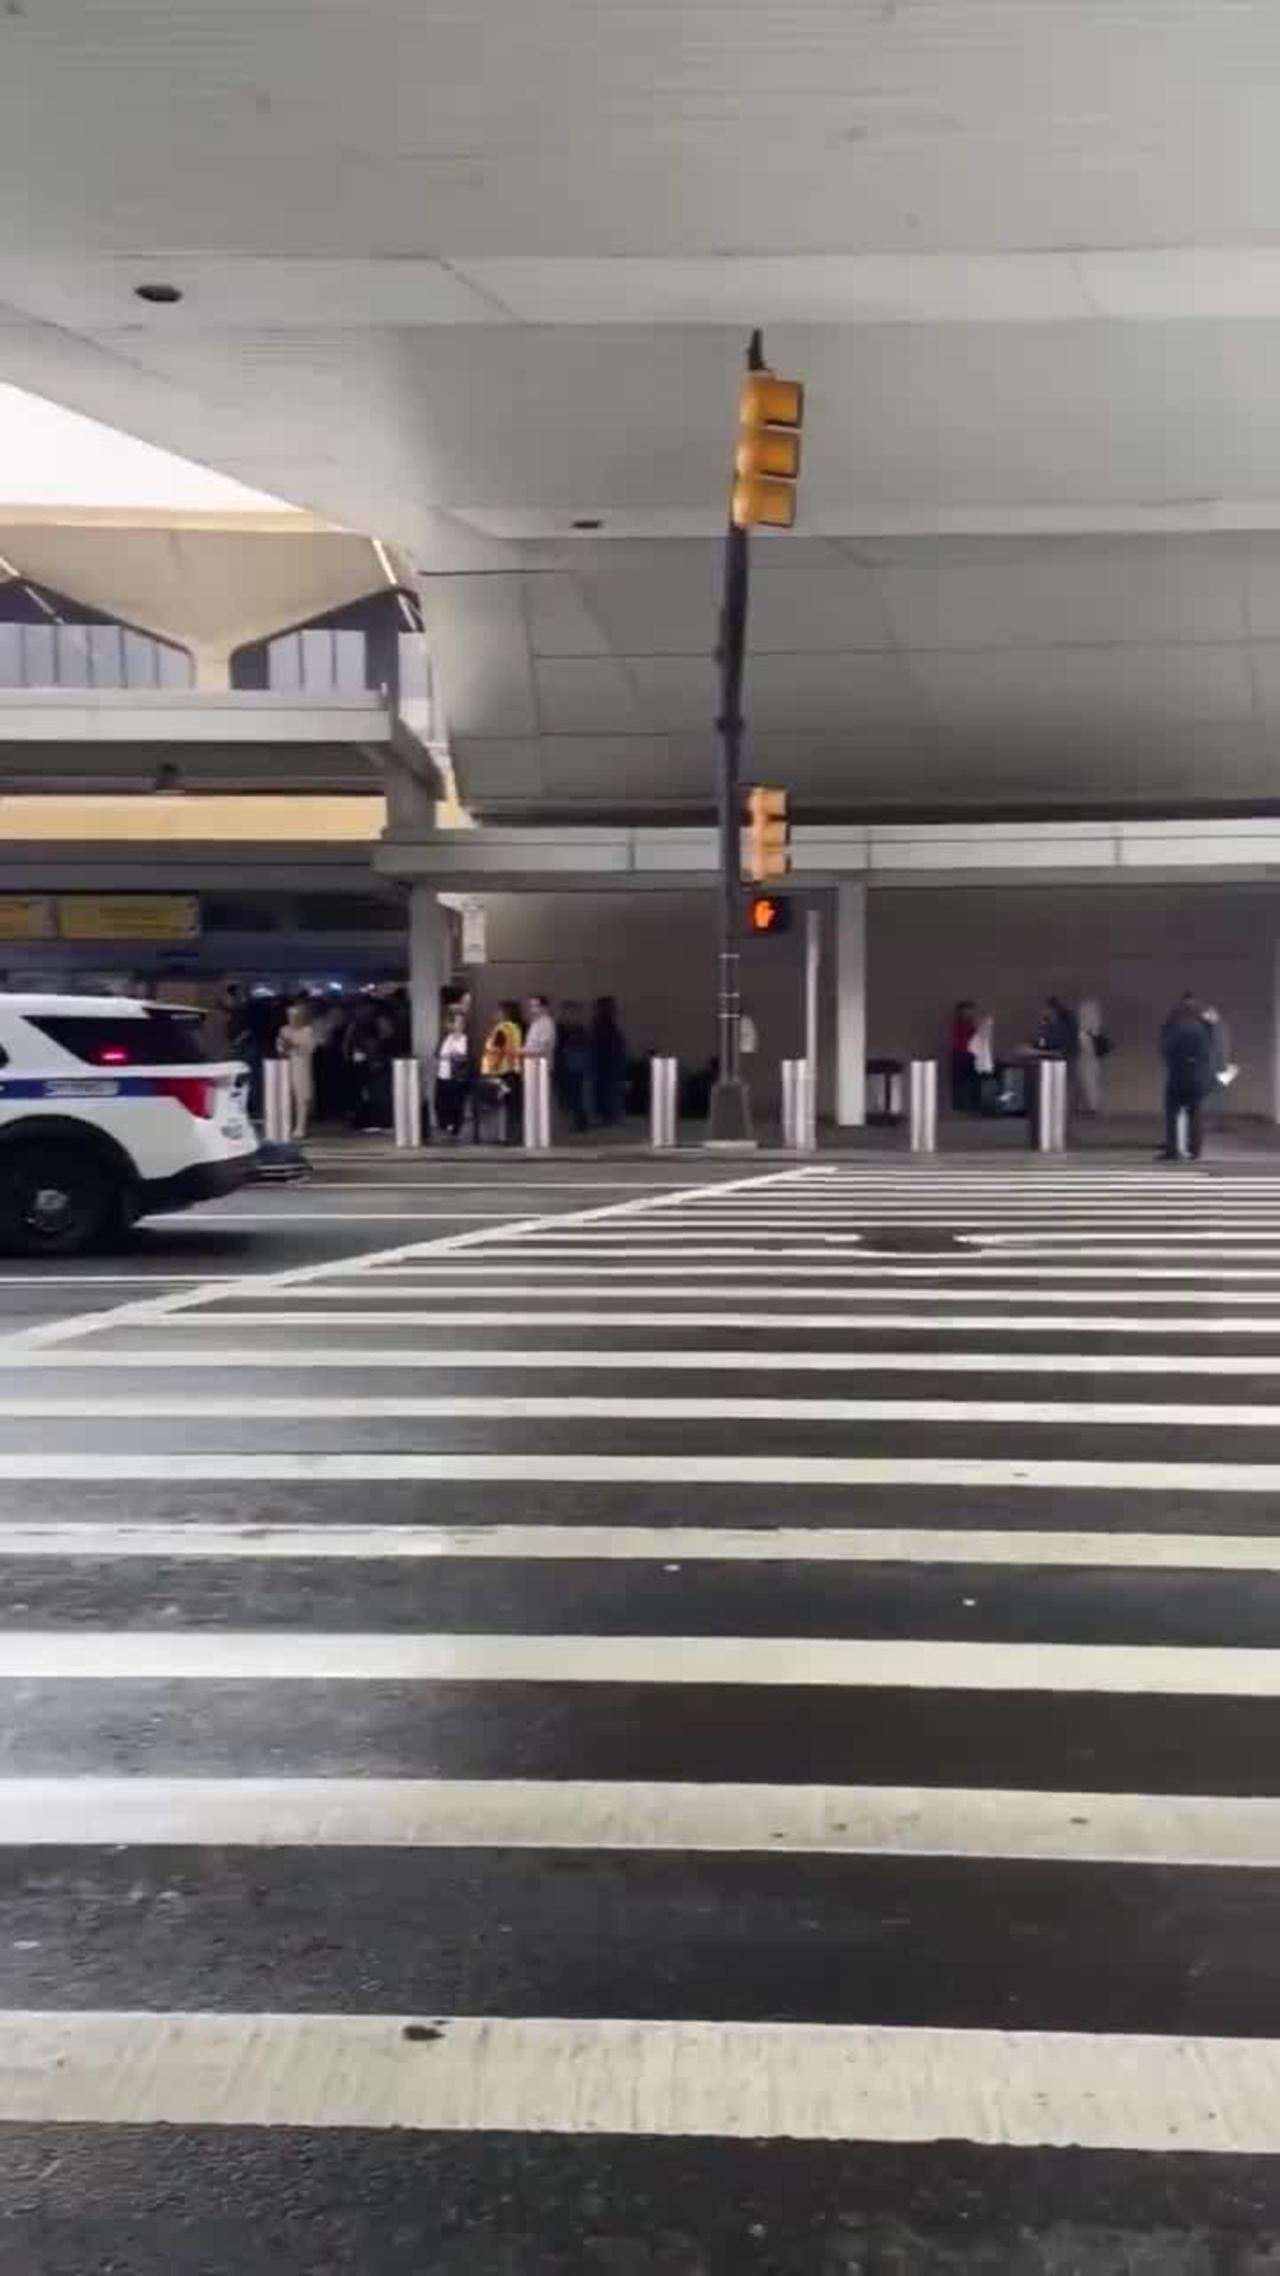 Newark Airport Terminal C Has Been Evacuated for Possible Threat.